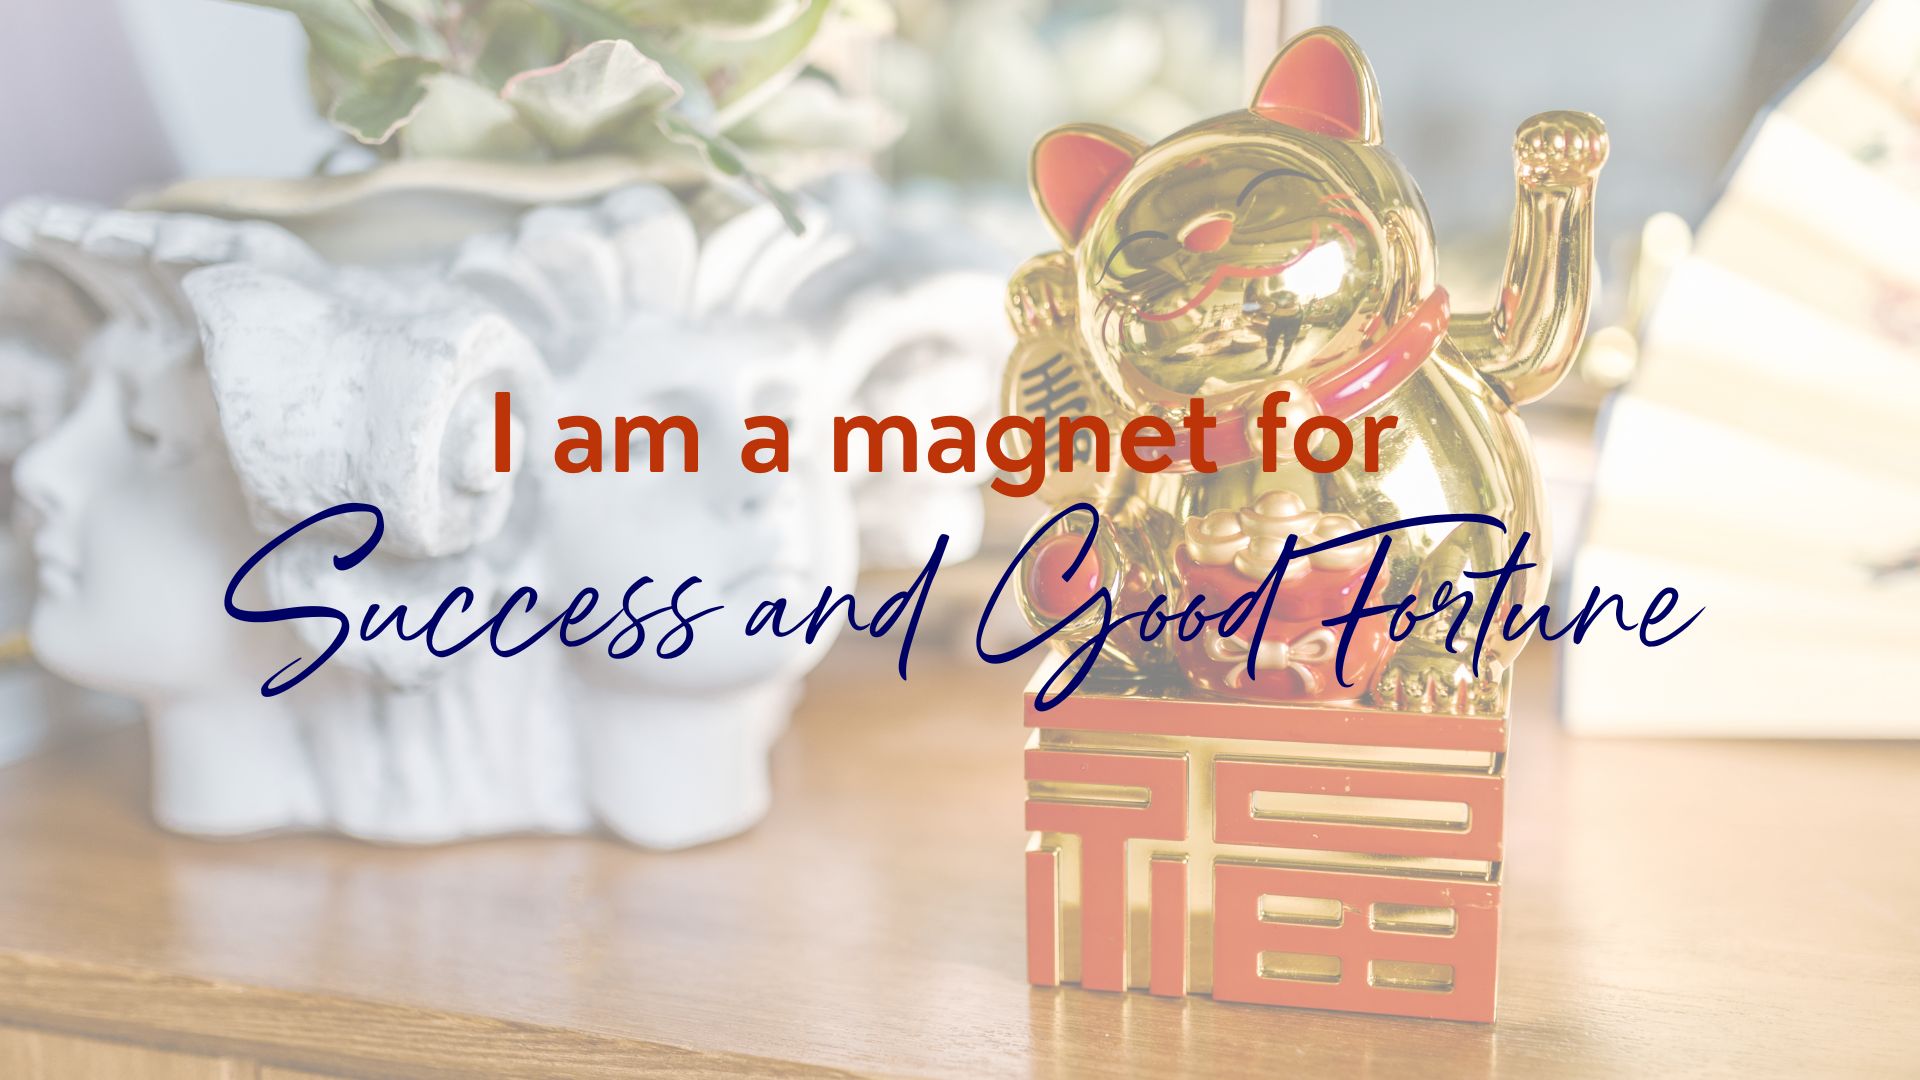 I am a magnet for success and good fortune – Affirmations